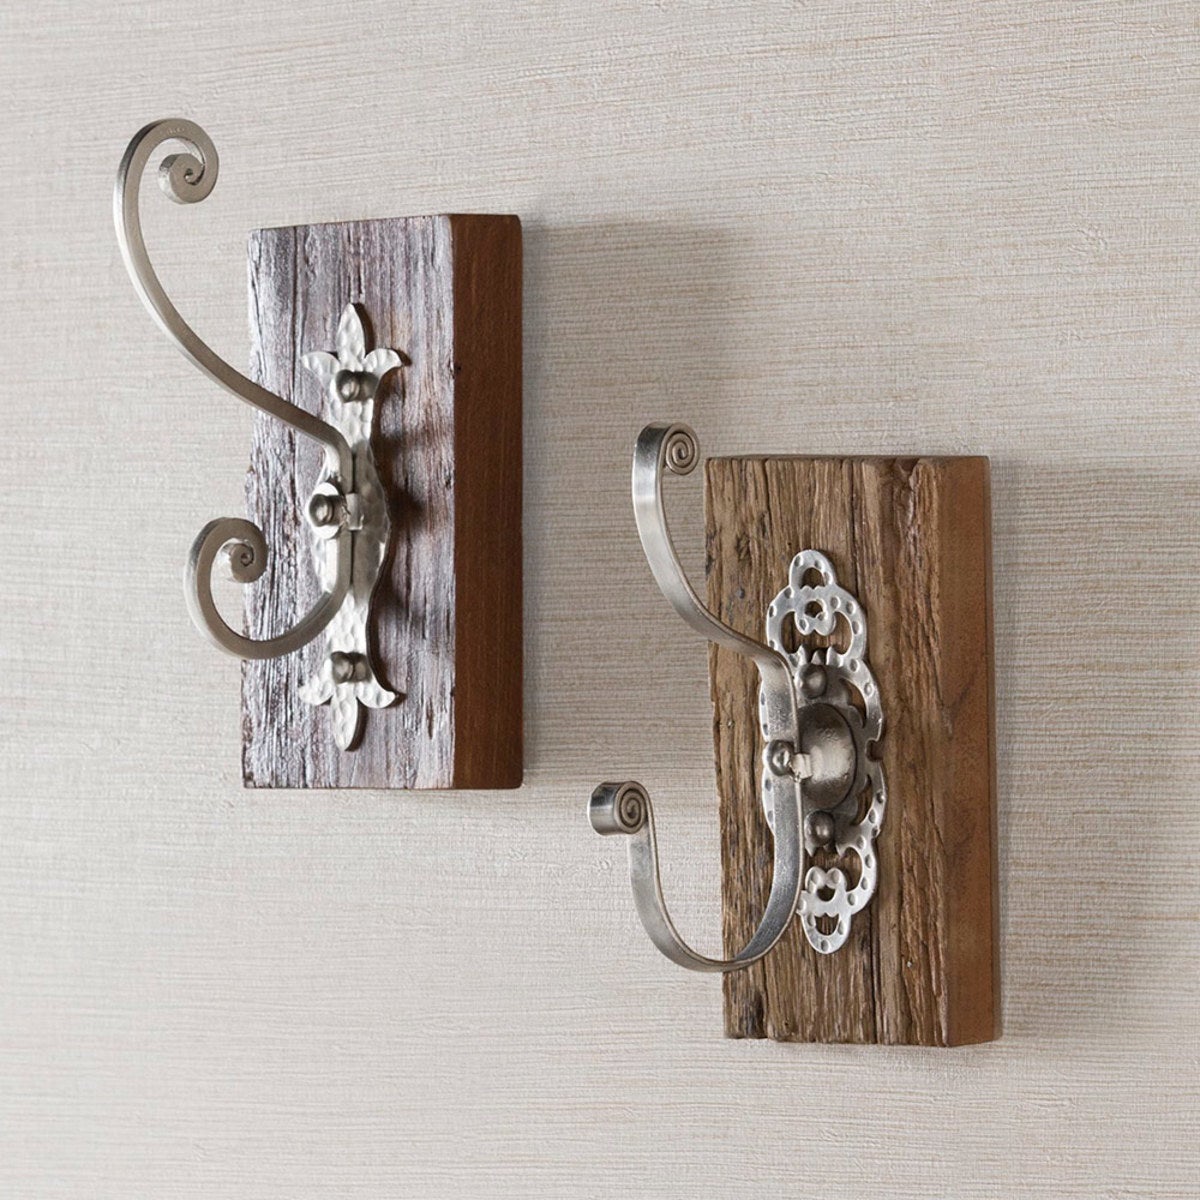 Antiqued Iron and Reclaimed Wood Wall Hooks - Set of 2